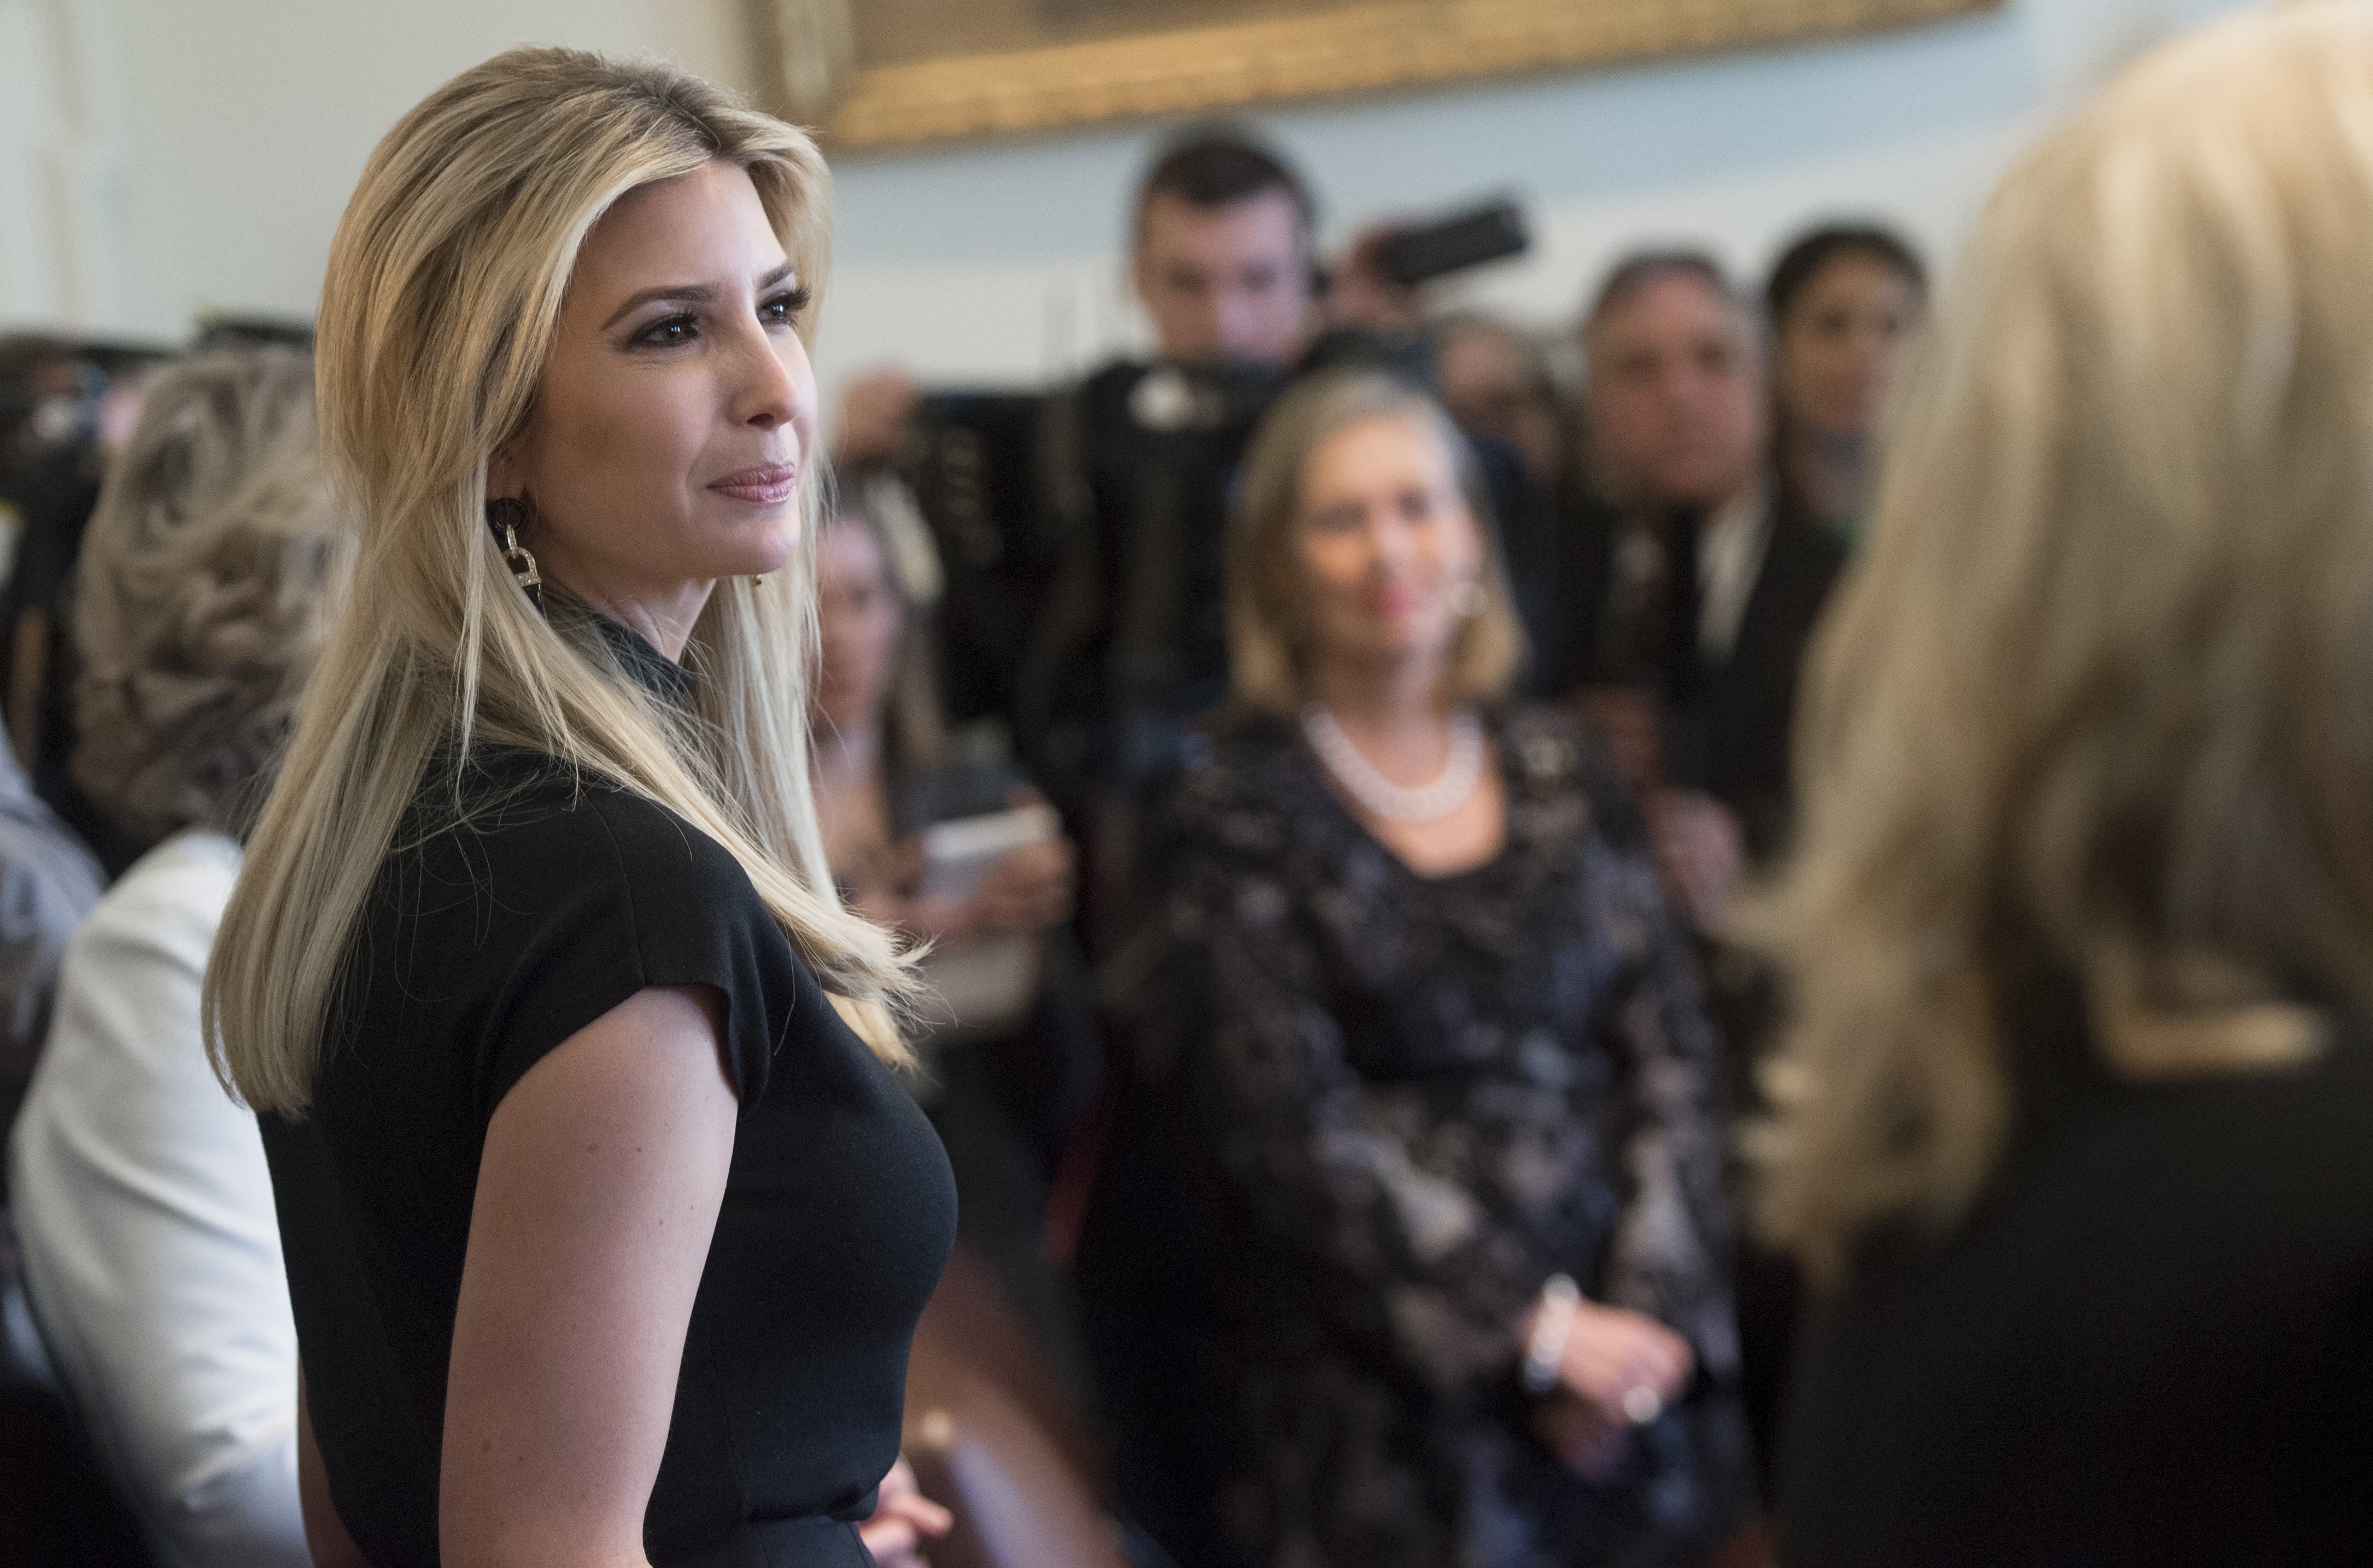 Ivanka Trump, daughter of US President Donald Trump, attends a roundtable discussion with Canadian Prime Minister Justin Trudeau on women entrepreneurs and business leaders in the Cabinet Room of the White House in Washington, DC, Feb. 13, 2017. (Saul Loeb—AFP/Getty Images)